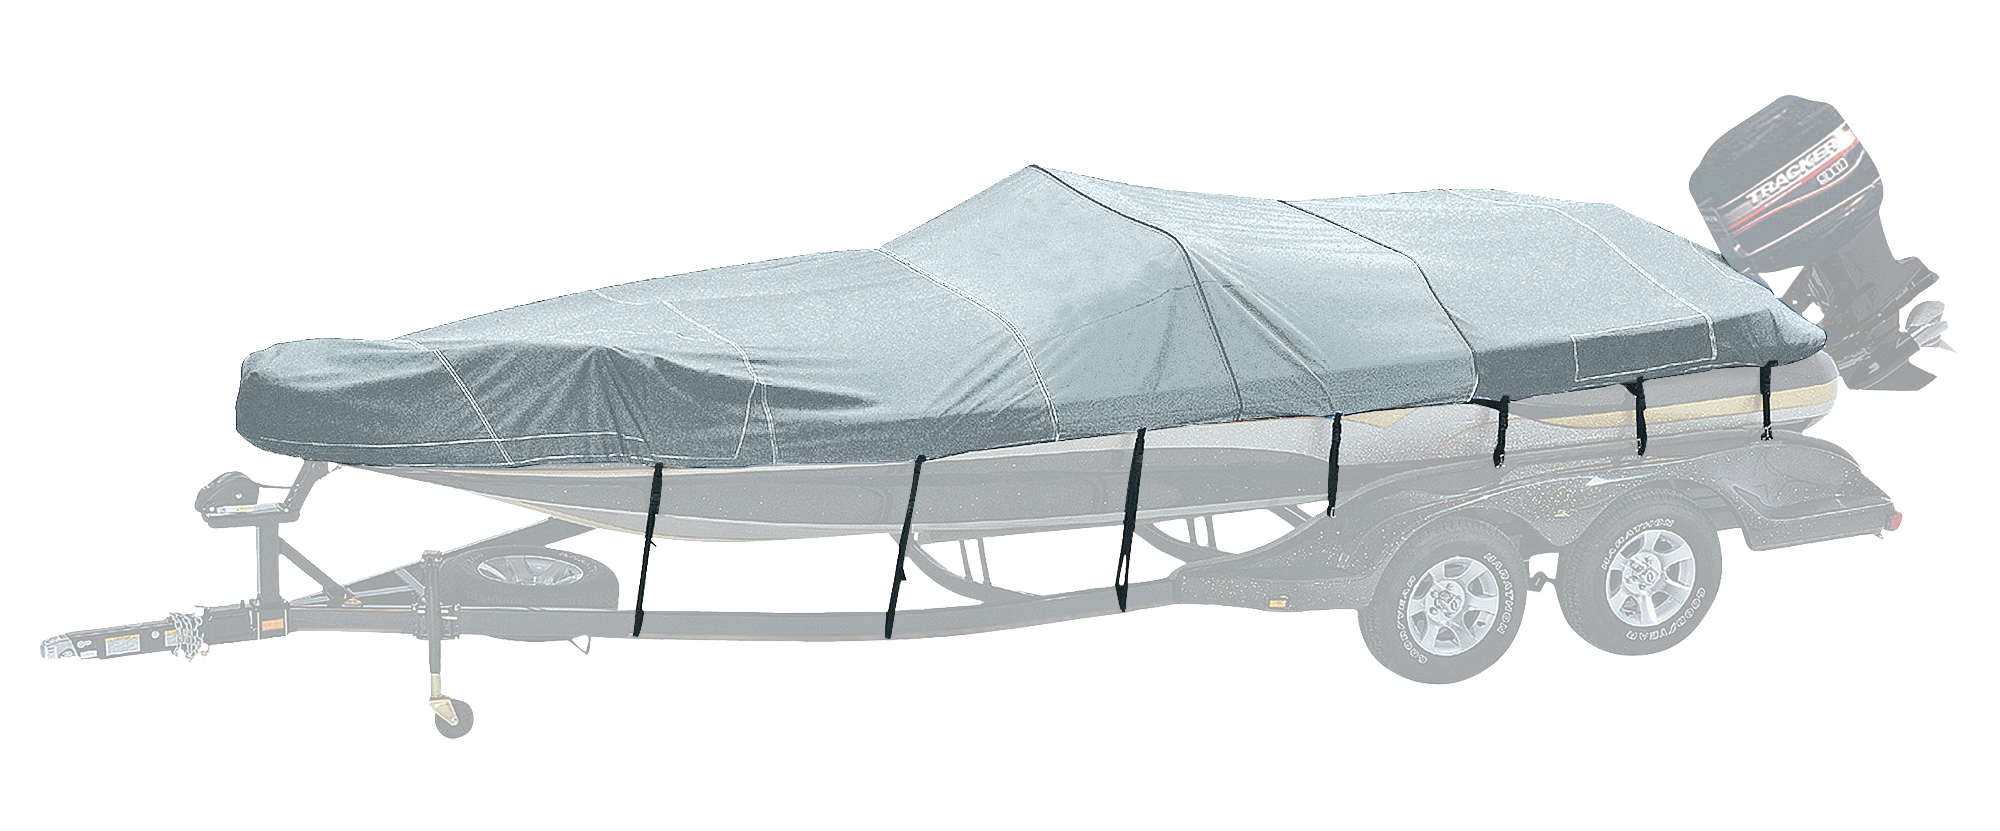 Bass Pro Shops Exact Fit Boat Cover by Westland - Tahoe Boats - 2005 195 Deckboat I/O - Arctic Silver